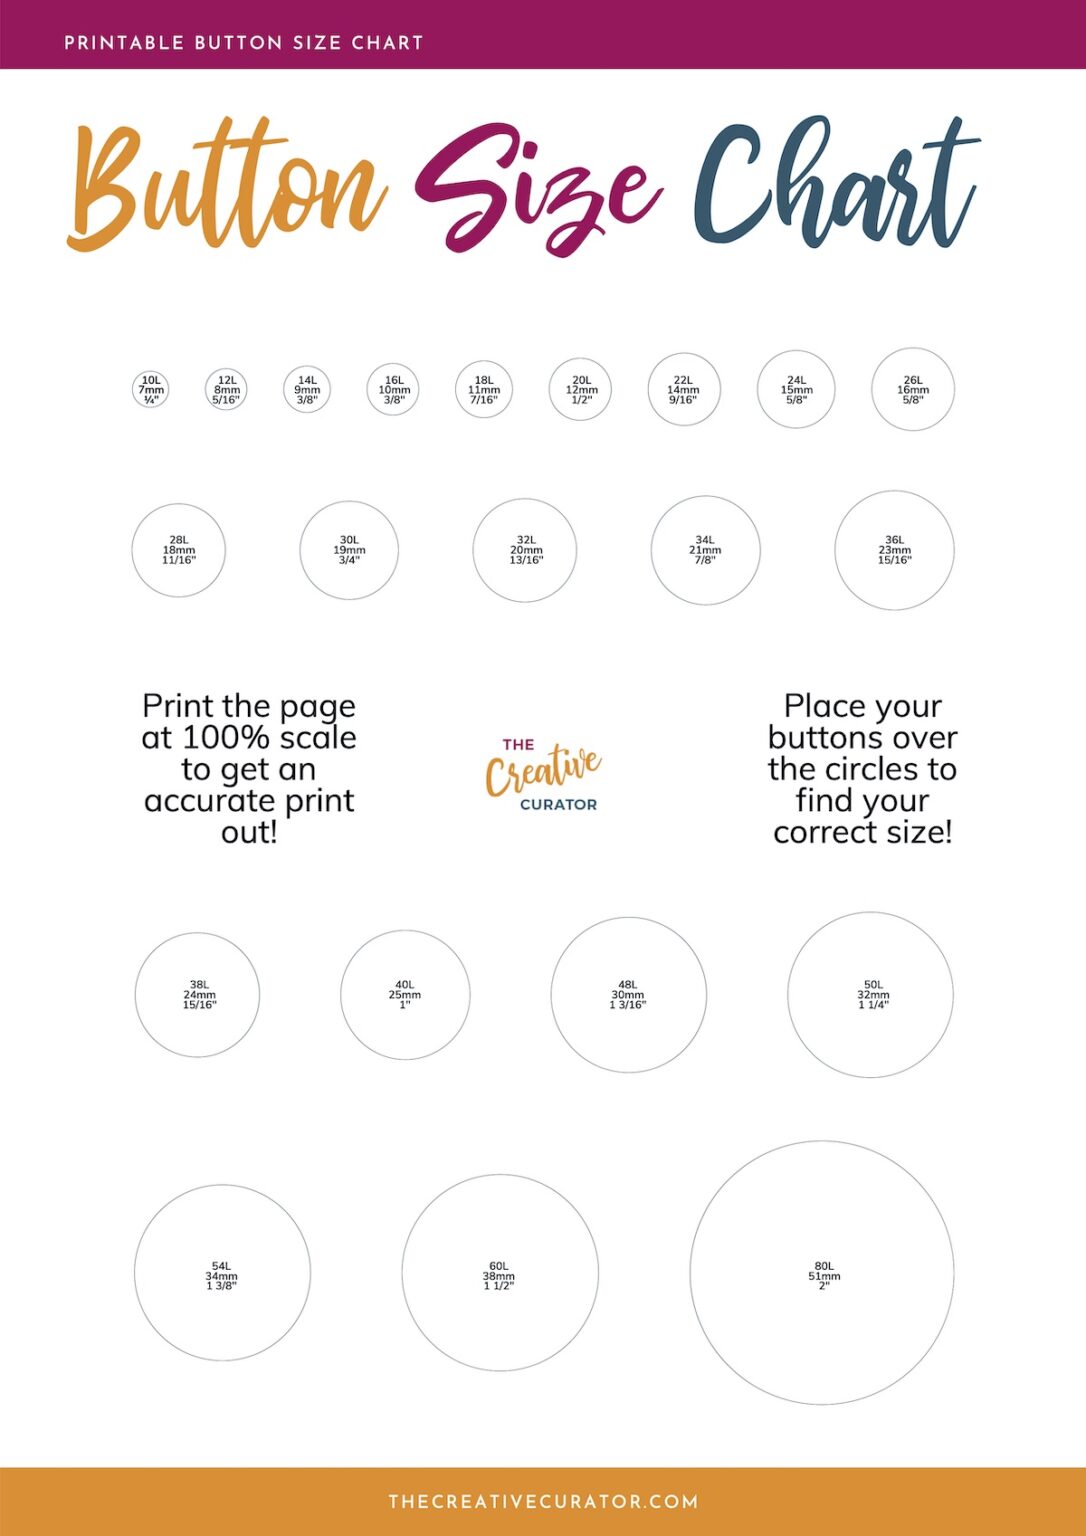 printable-button-size-chart-how-to-measure-buttons-the-creative-curator